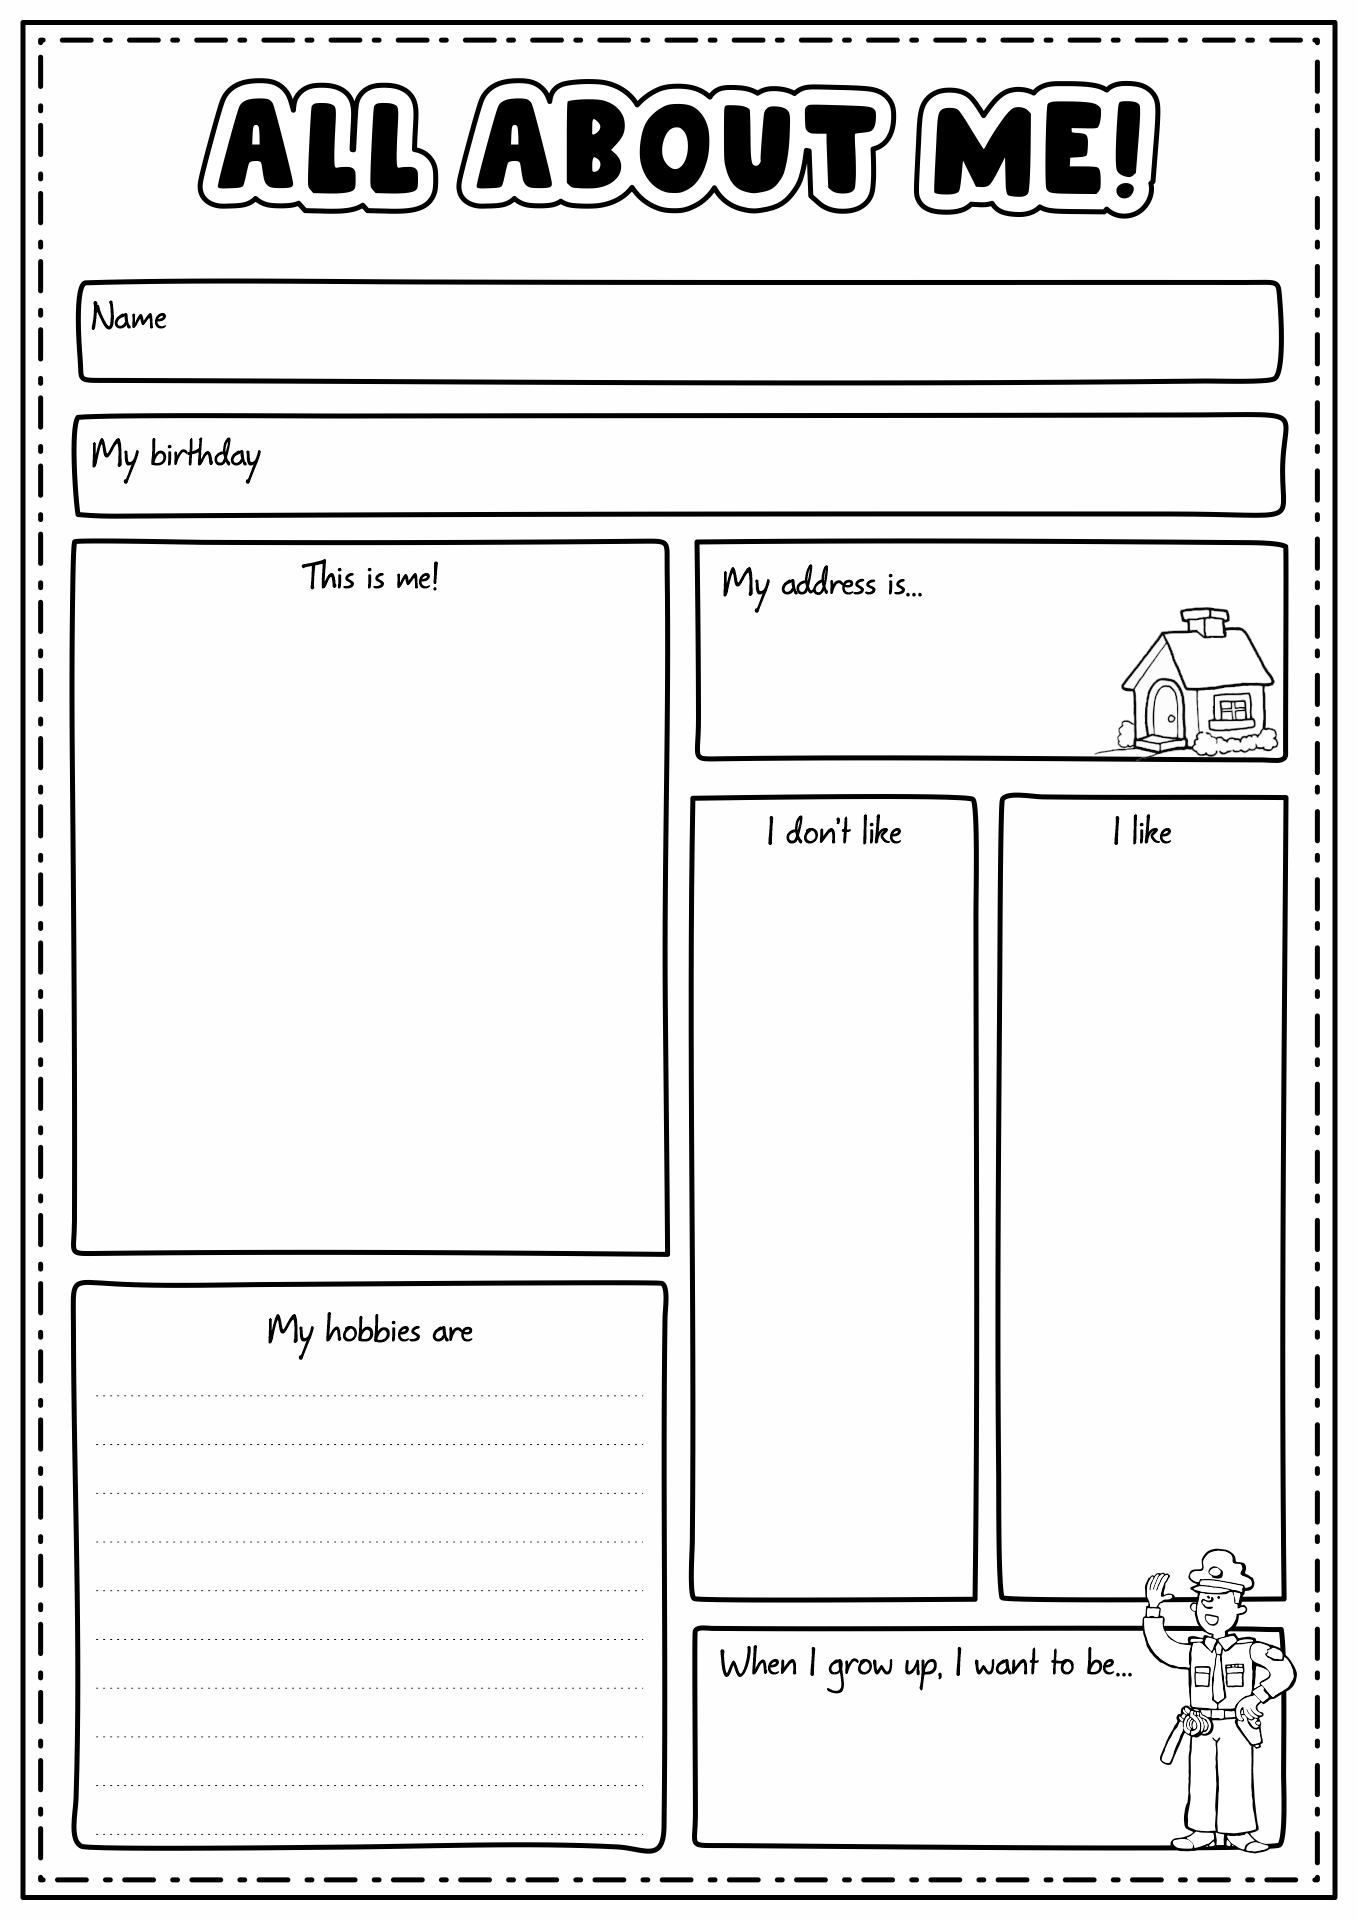 All About Me Printable Kids Activities Image